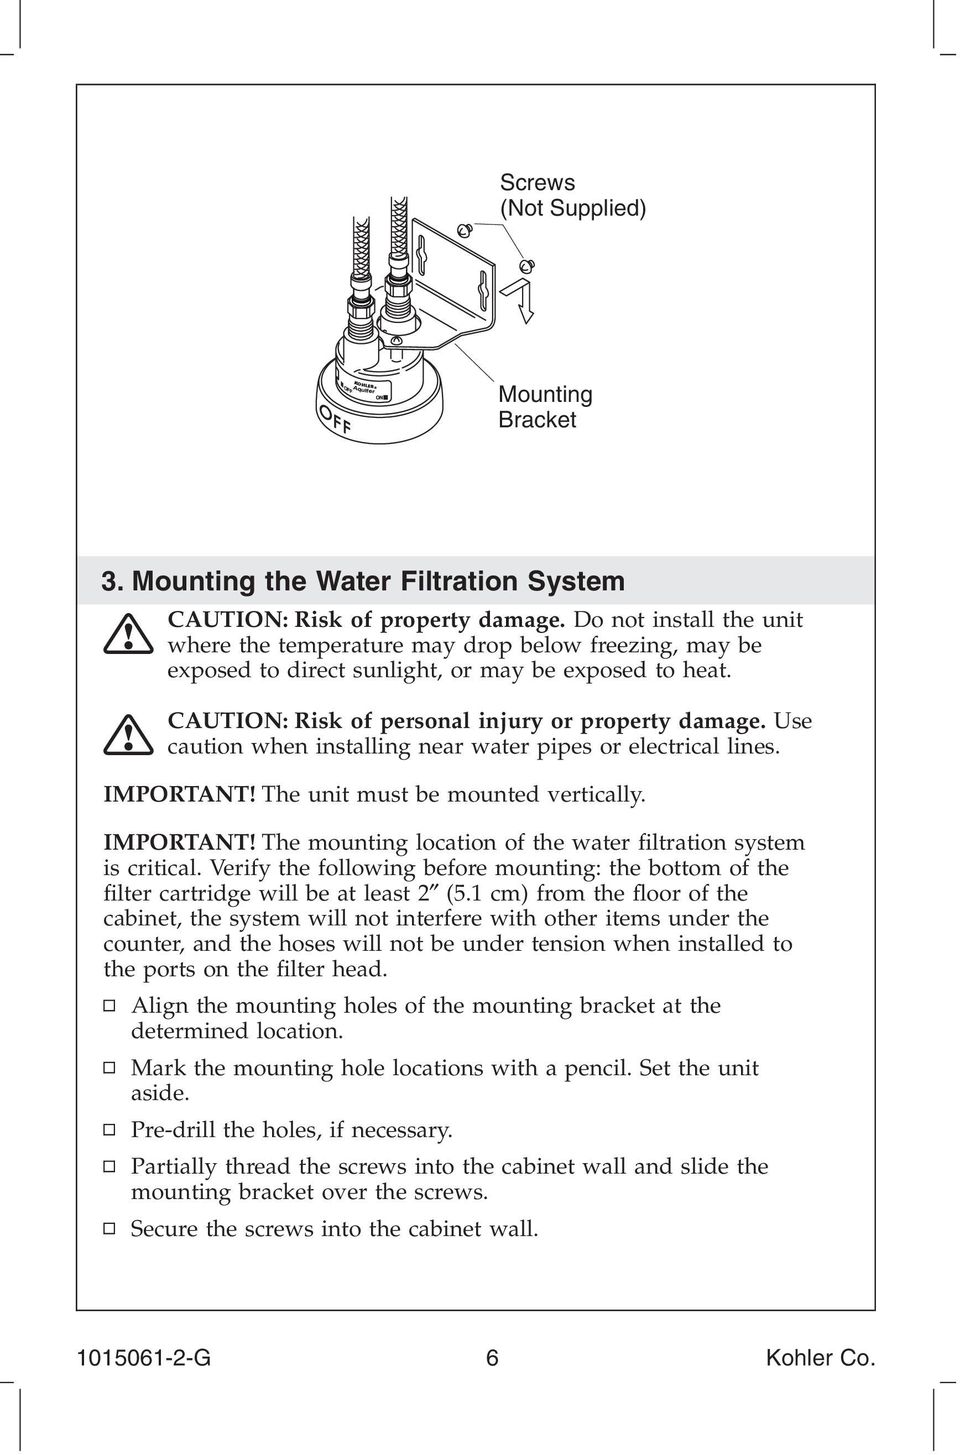 Use caution when installing near water pipes or electrical lines. IMPORTANT! The unit must be mounted vertically. IMPORTANT! The mounting location of the water filtration system is critical.